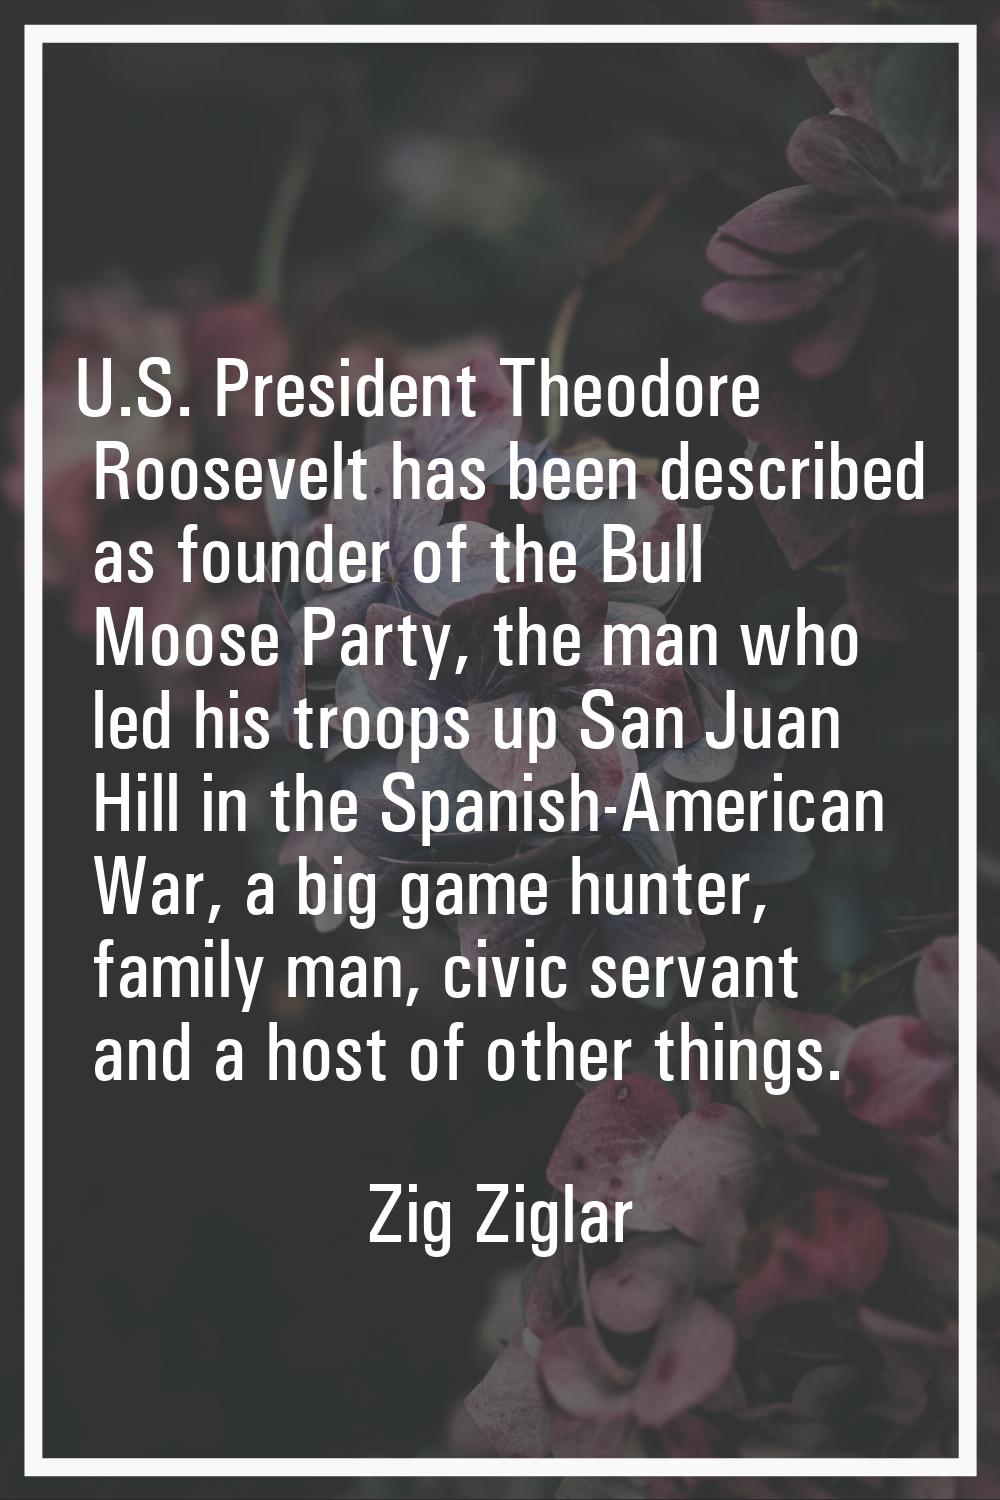 U.S. President Theodore Roosevelt has been described as founder of the Bull Moose Party, the man wh